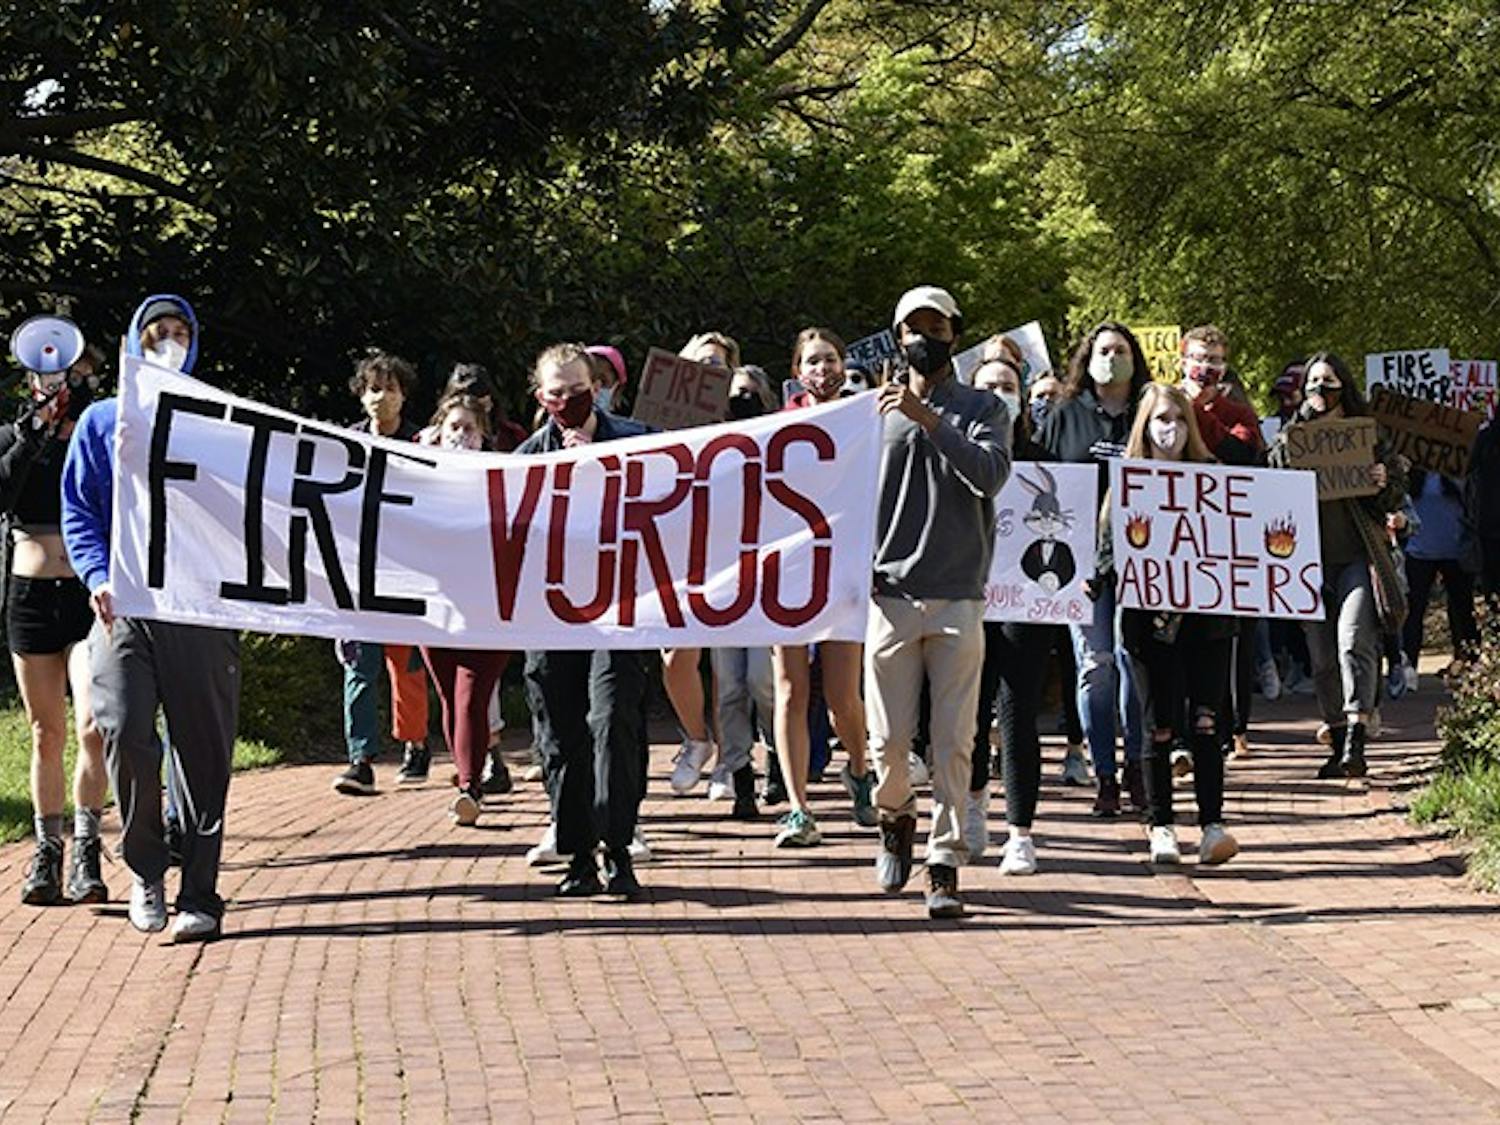 Protestors march from Pickens Street Bridge to the President's House holding signs that demand the firing of all professors accused of sexual misconduct.&nbsp;